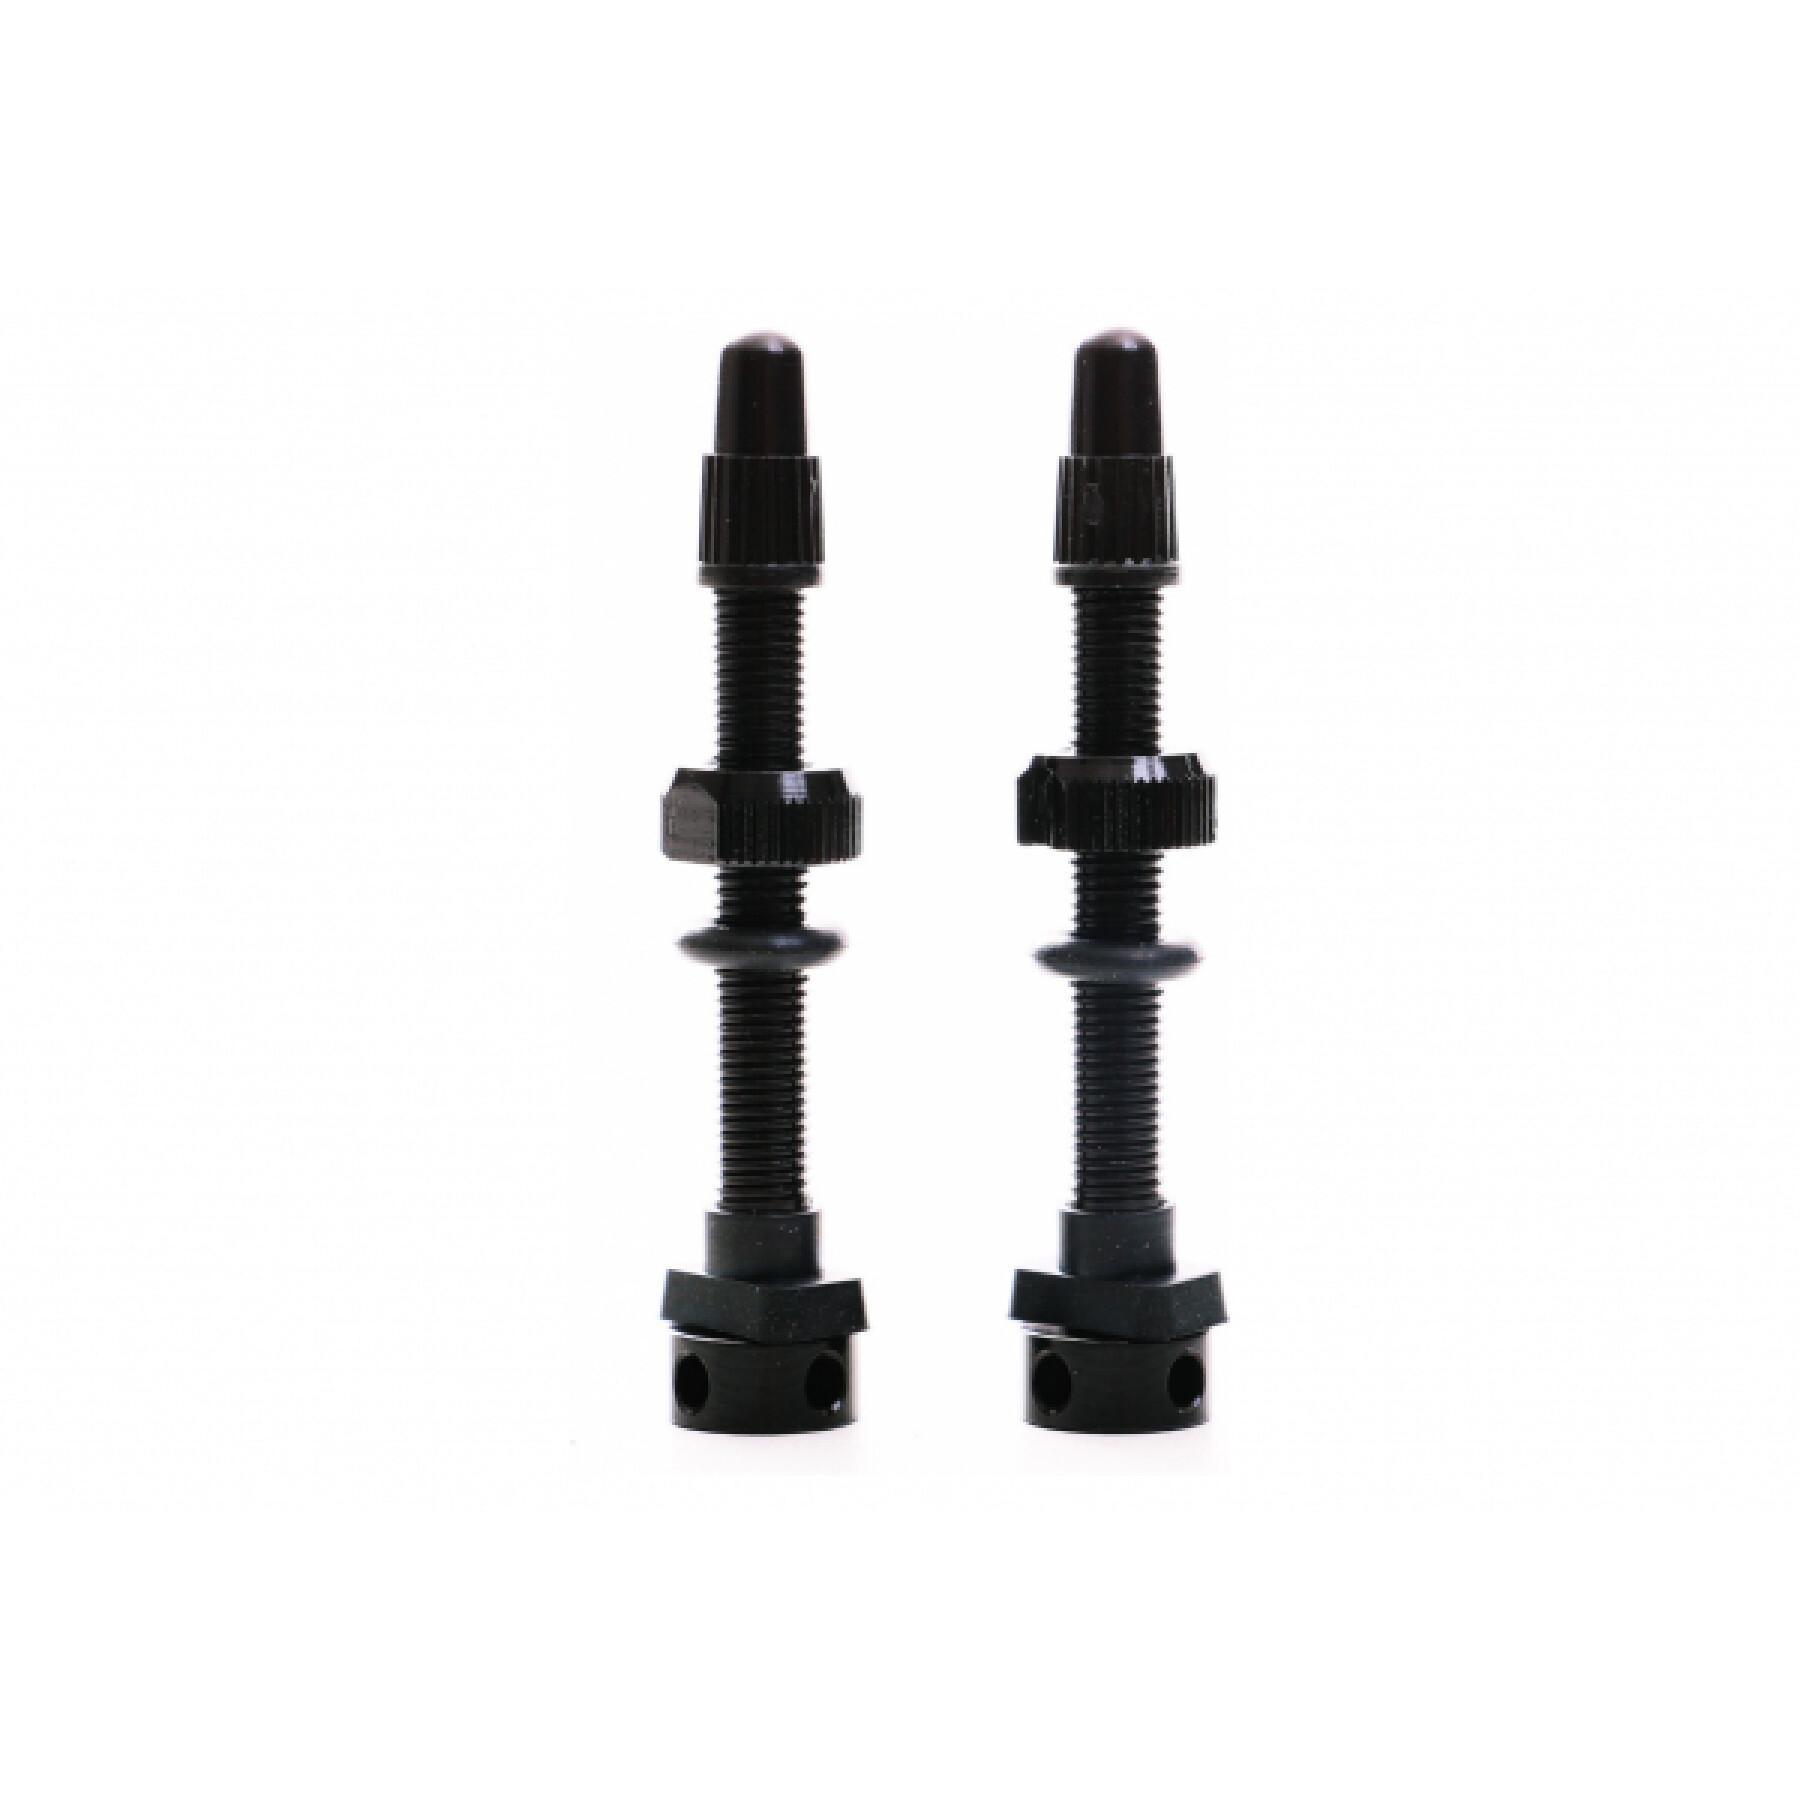 Pair of pneumatic accessories with valves included Mr Wolf insert banger 2.0 medium